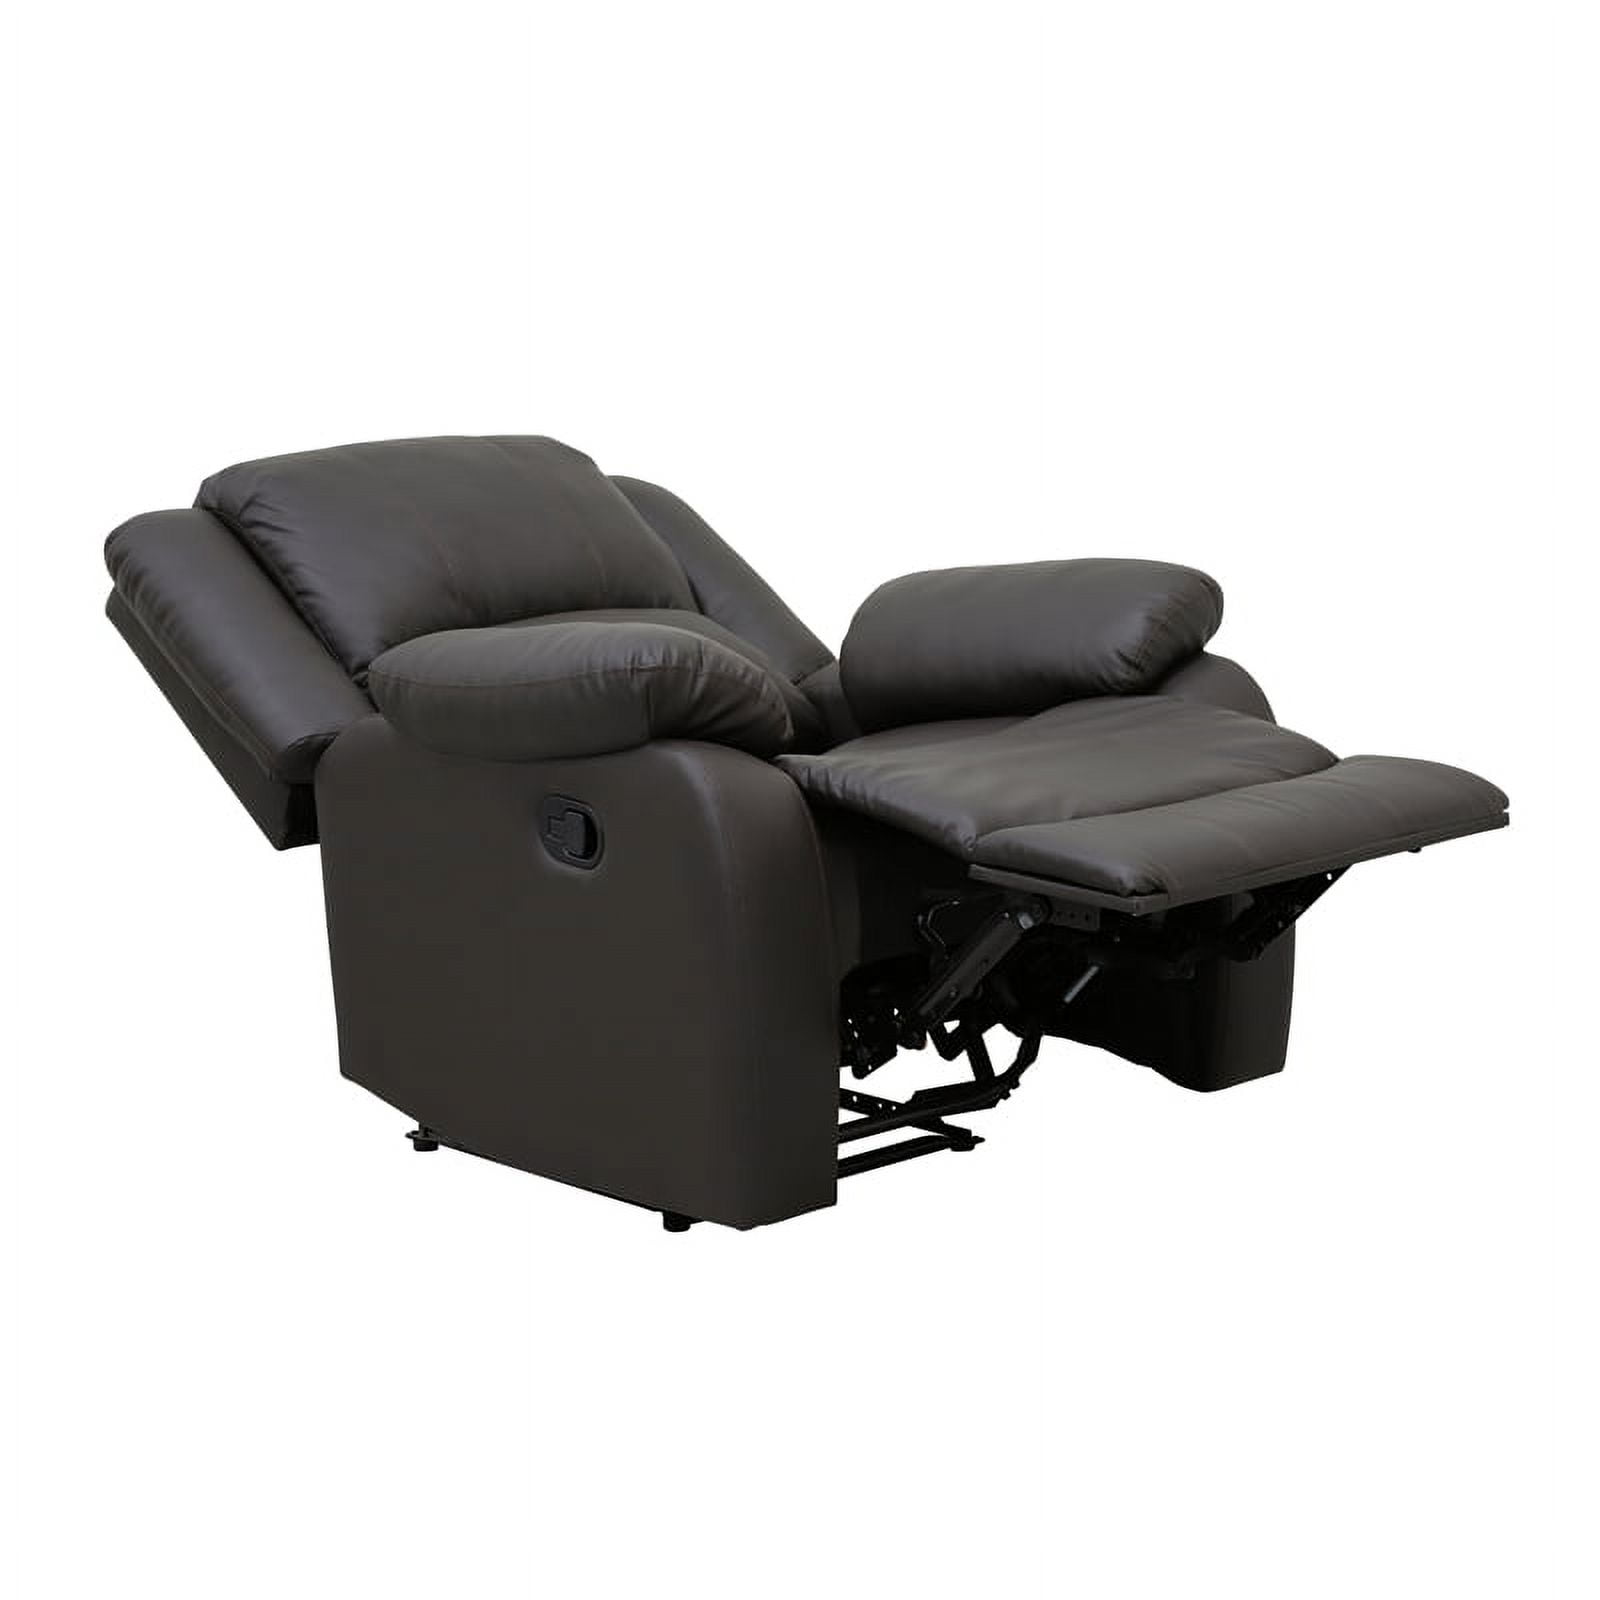 Lexicon Fairview Polished Microfiber Upholstered Manual Recliner